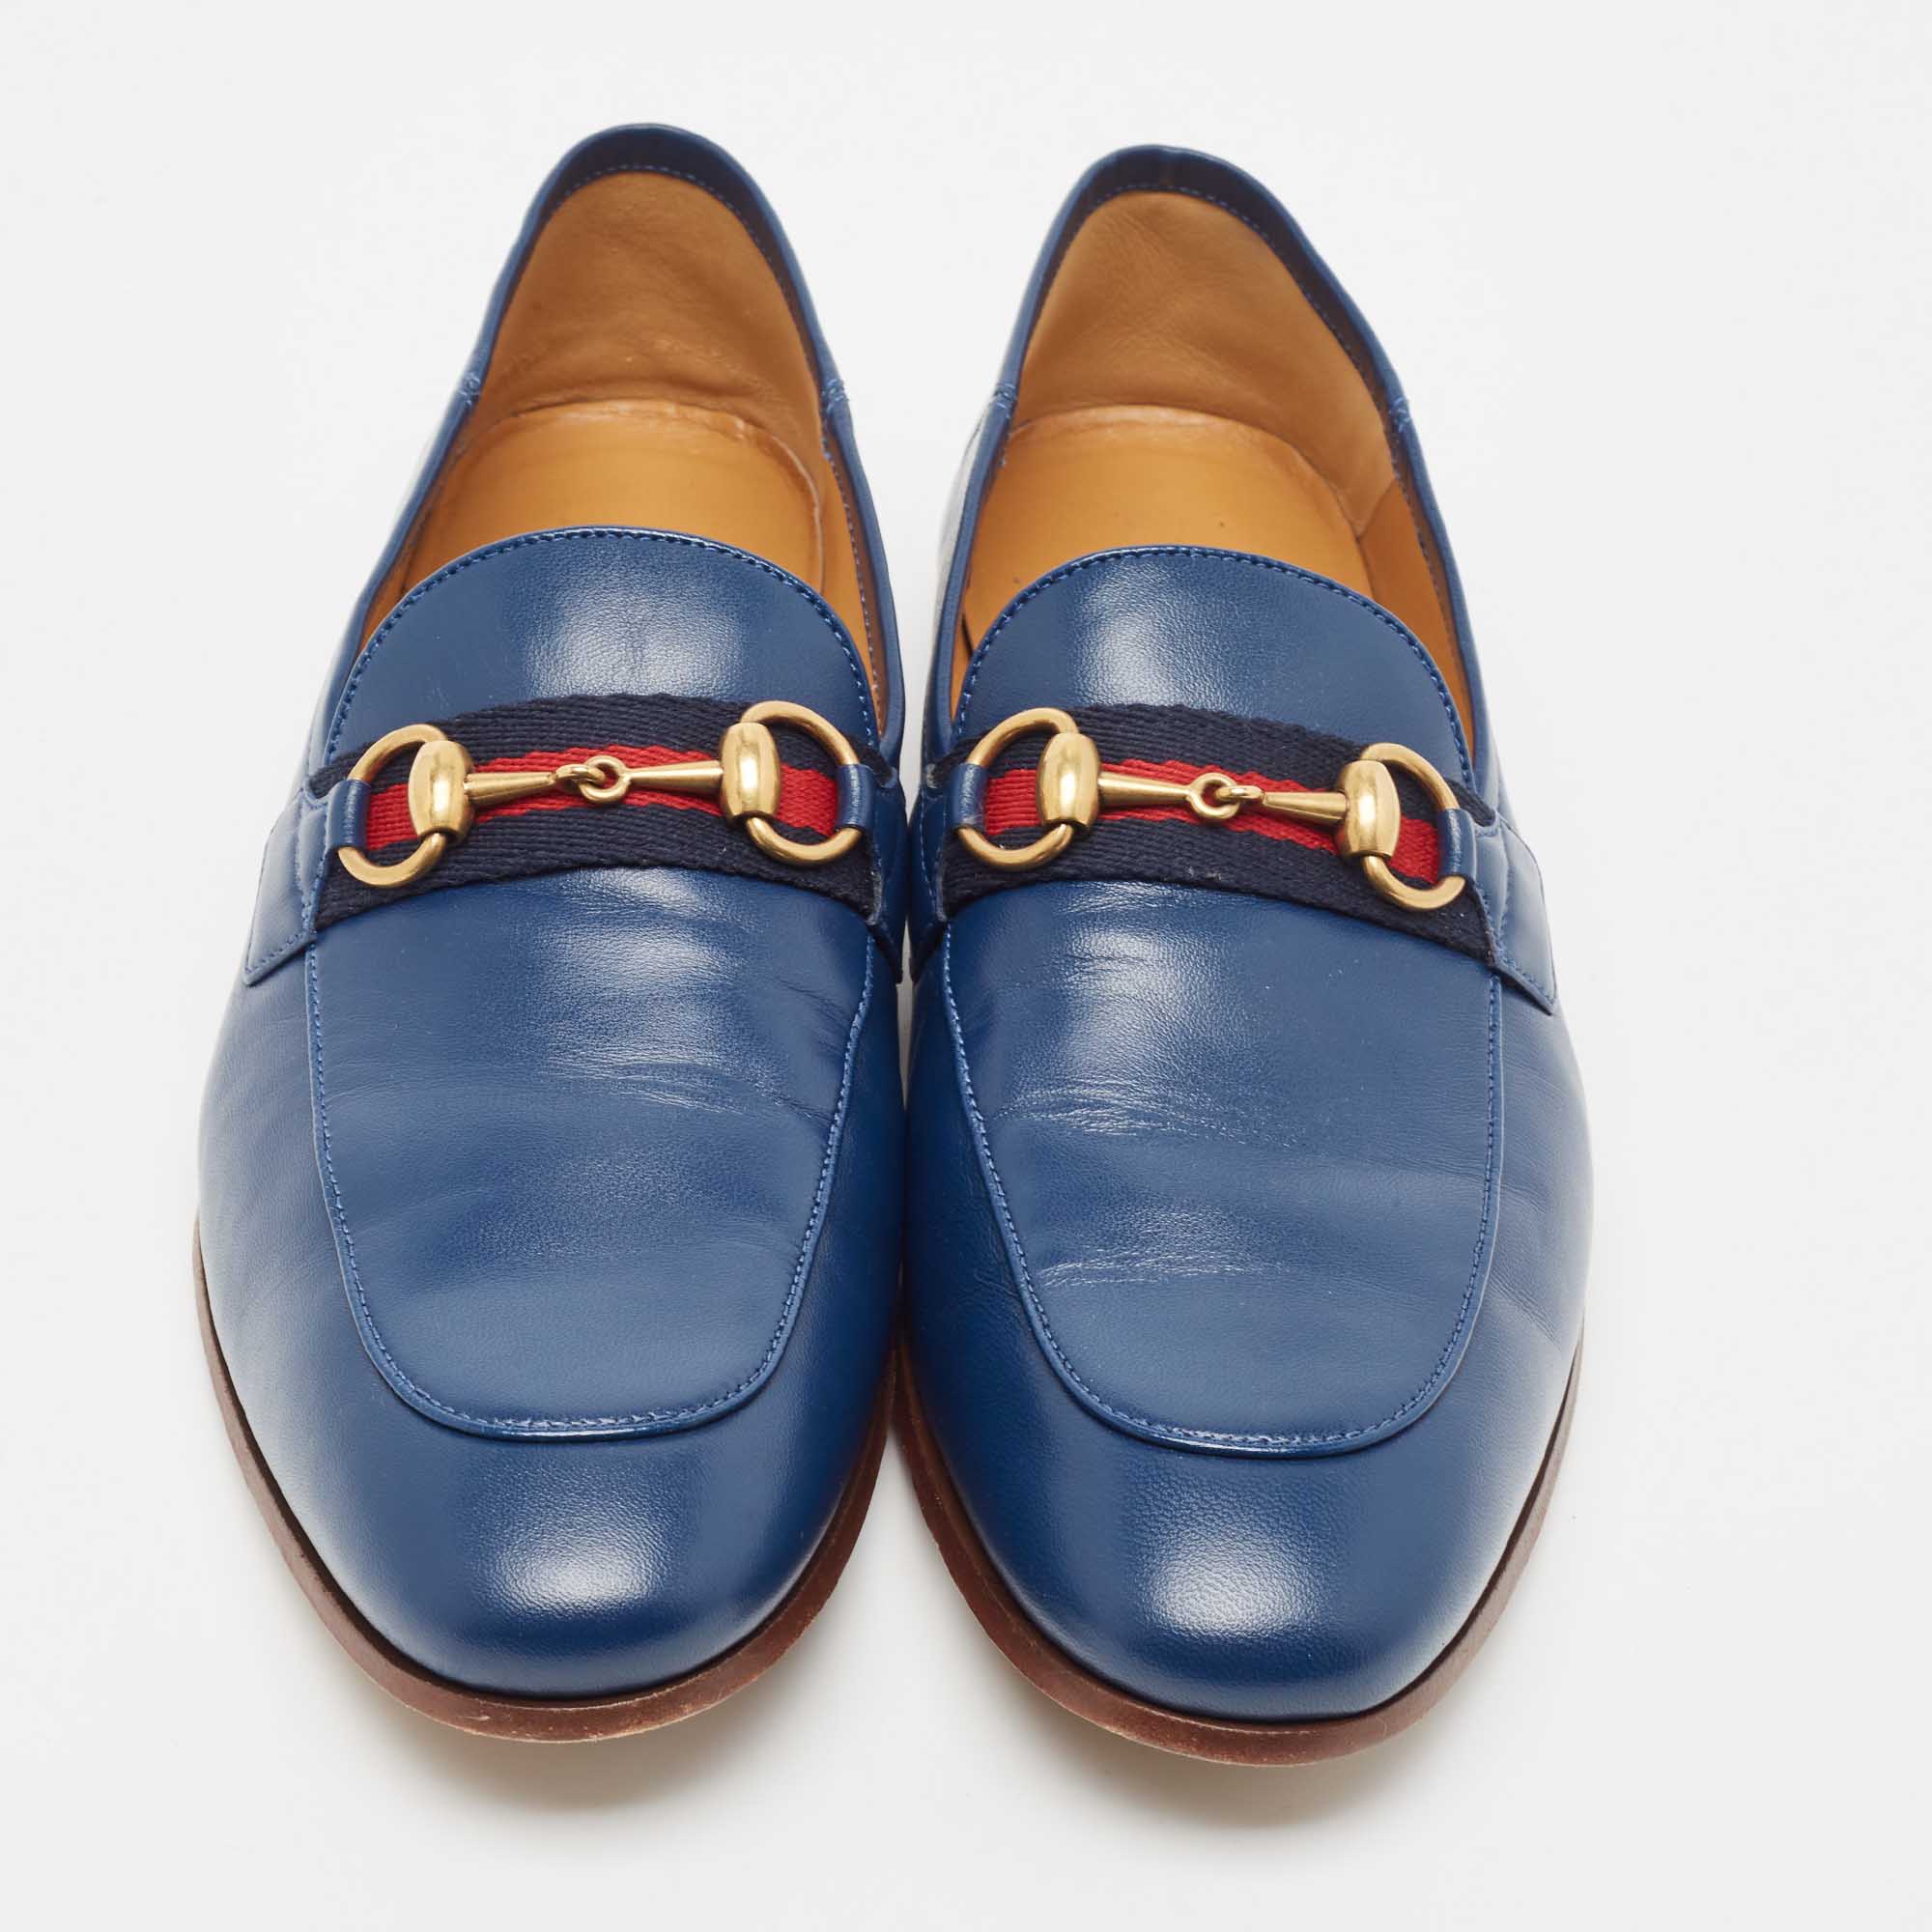 Gucci Blue Leather Web Horsebit Loafers Size 40